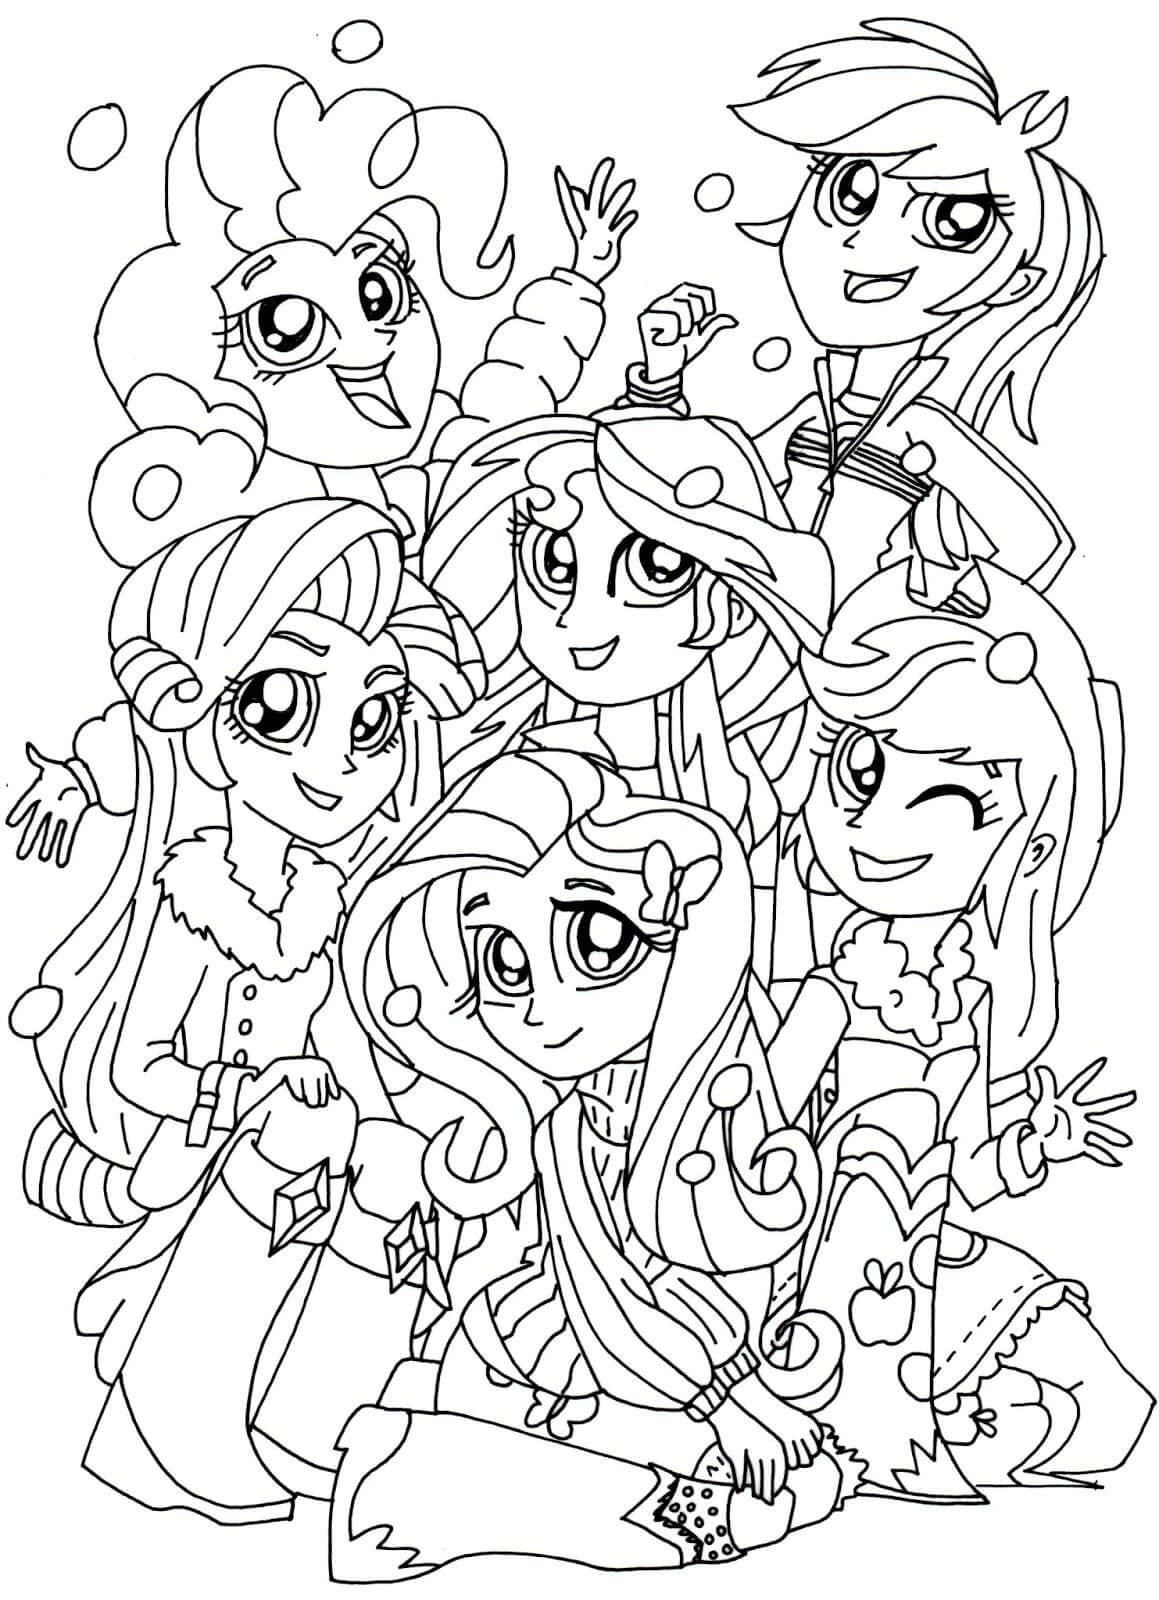 Coloring Books For Little Girls
 My Little Pony Equestria Girls Coloring Pages